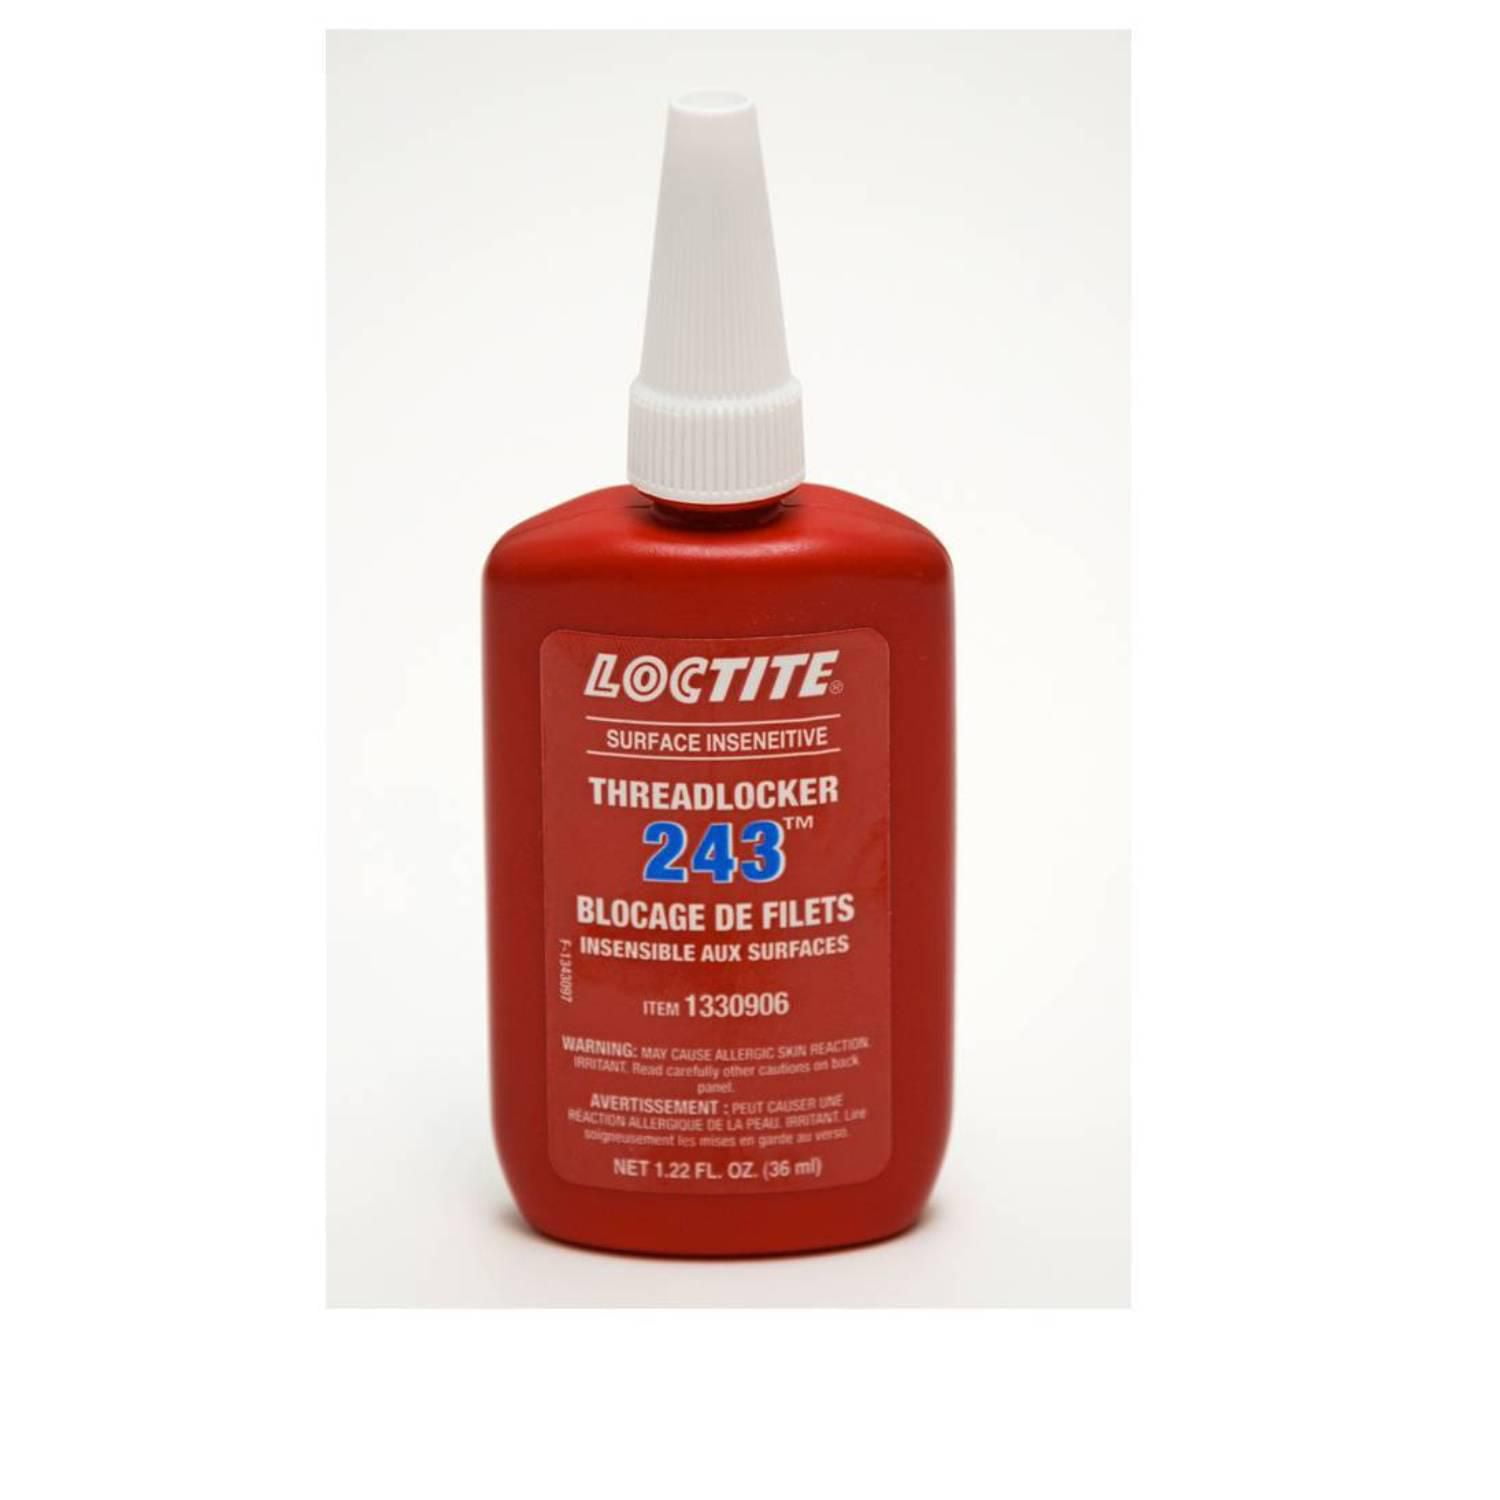 Which Is Better: Loctite 242 or Loctite 243?